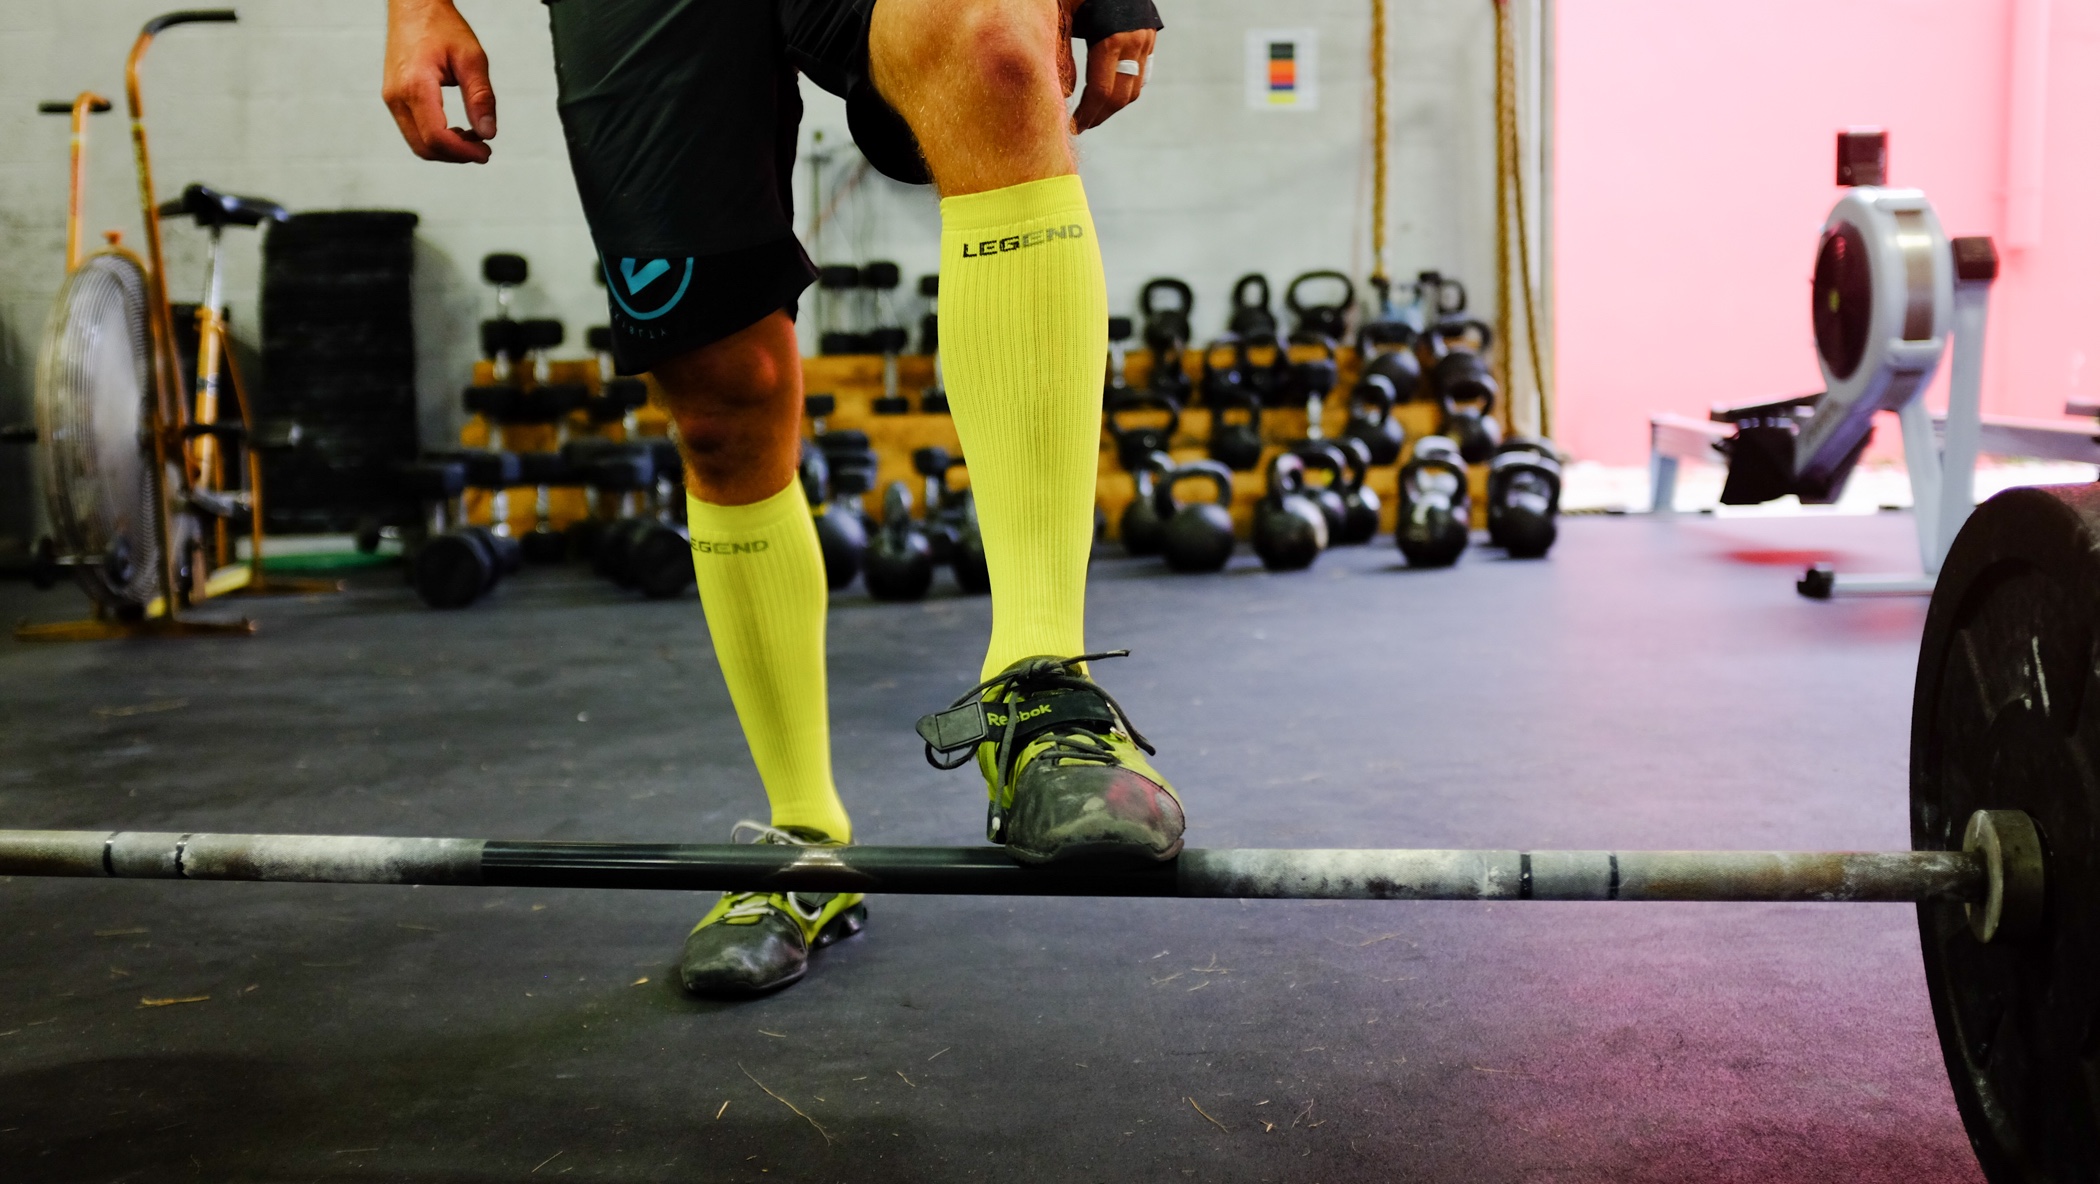 LEGEND athlete with yellow compression socks